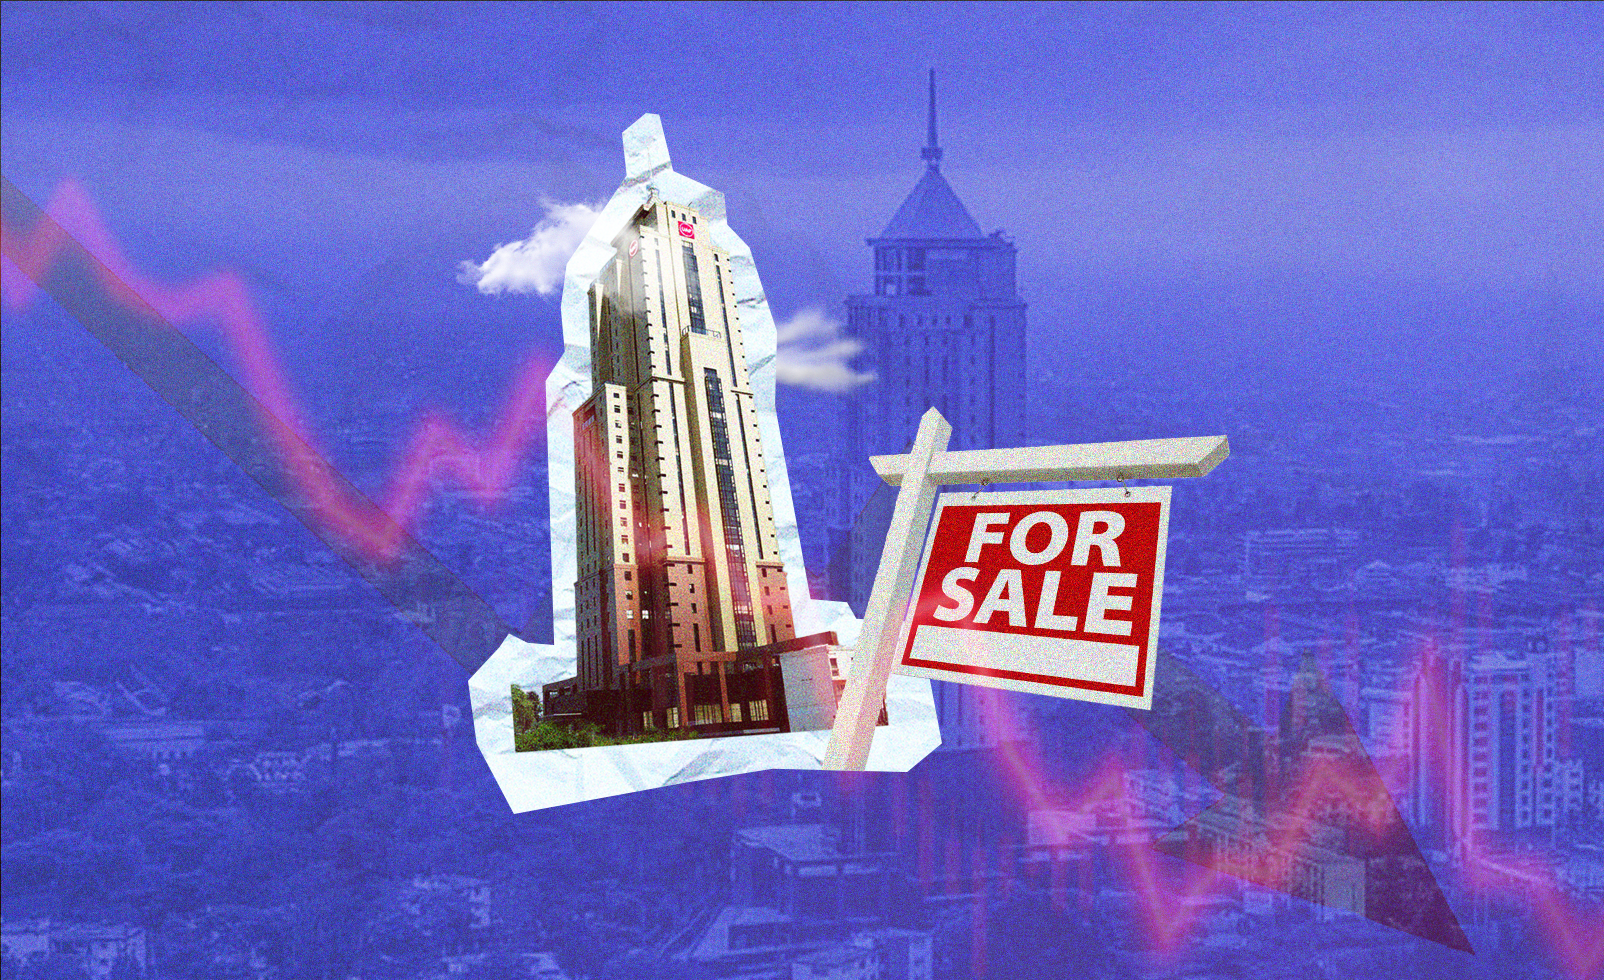 Nairobi’s Iconic Old Mutual Tower Up For Sale. Here Is What You Need To Know About The Building